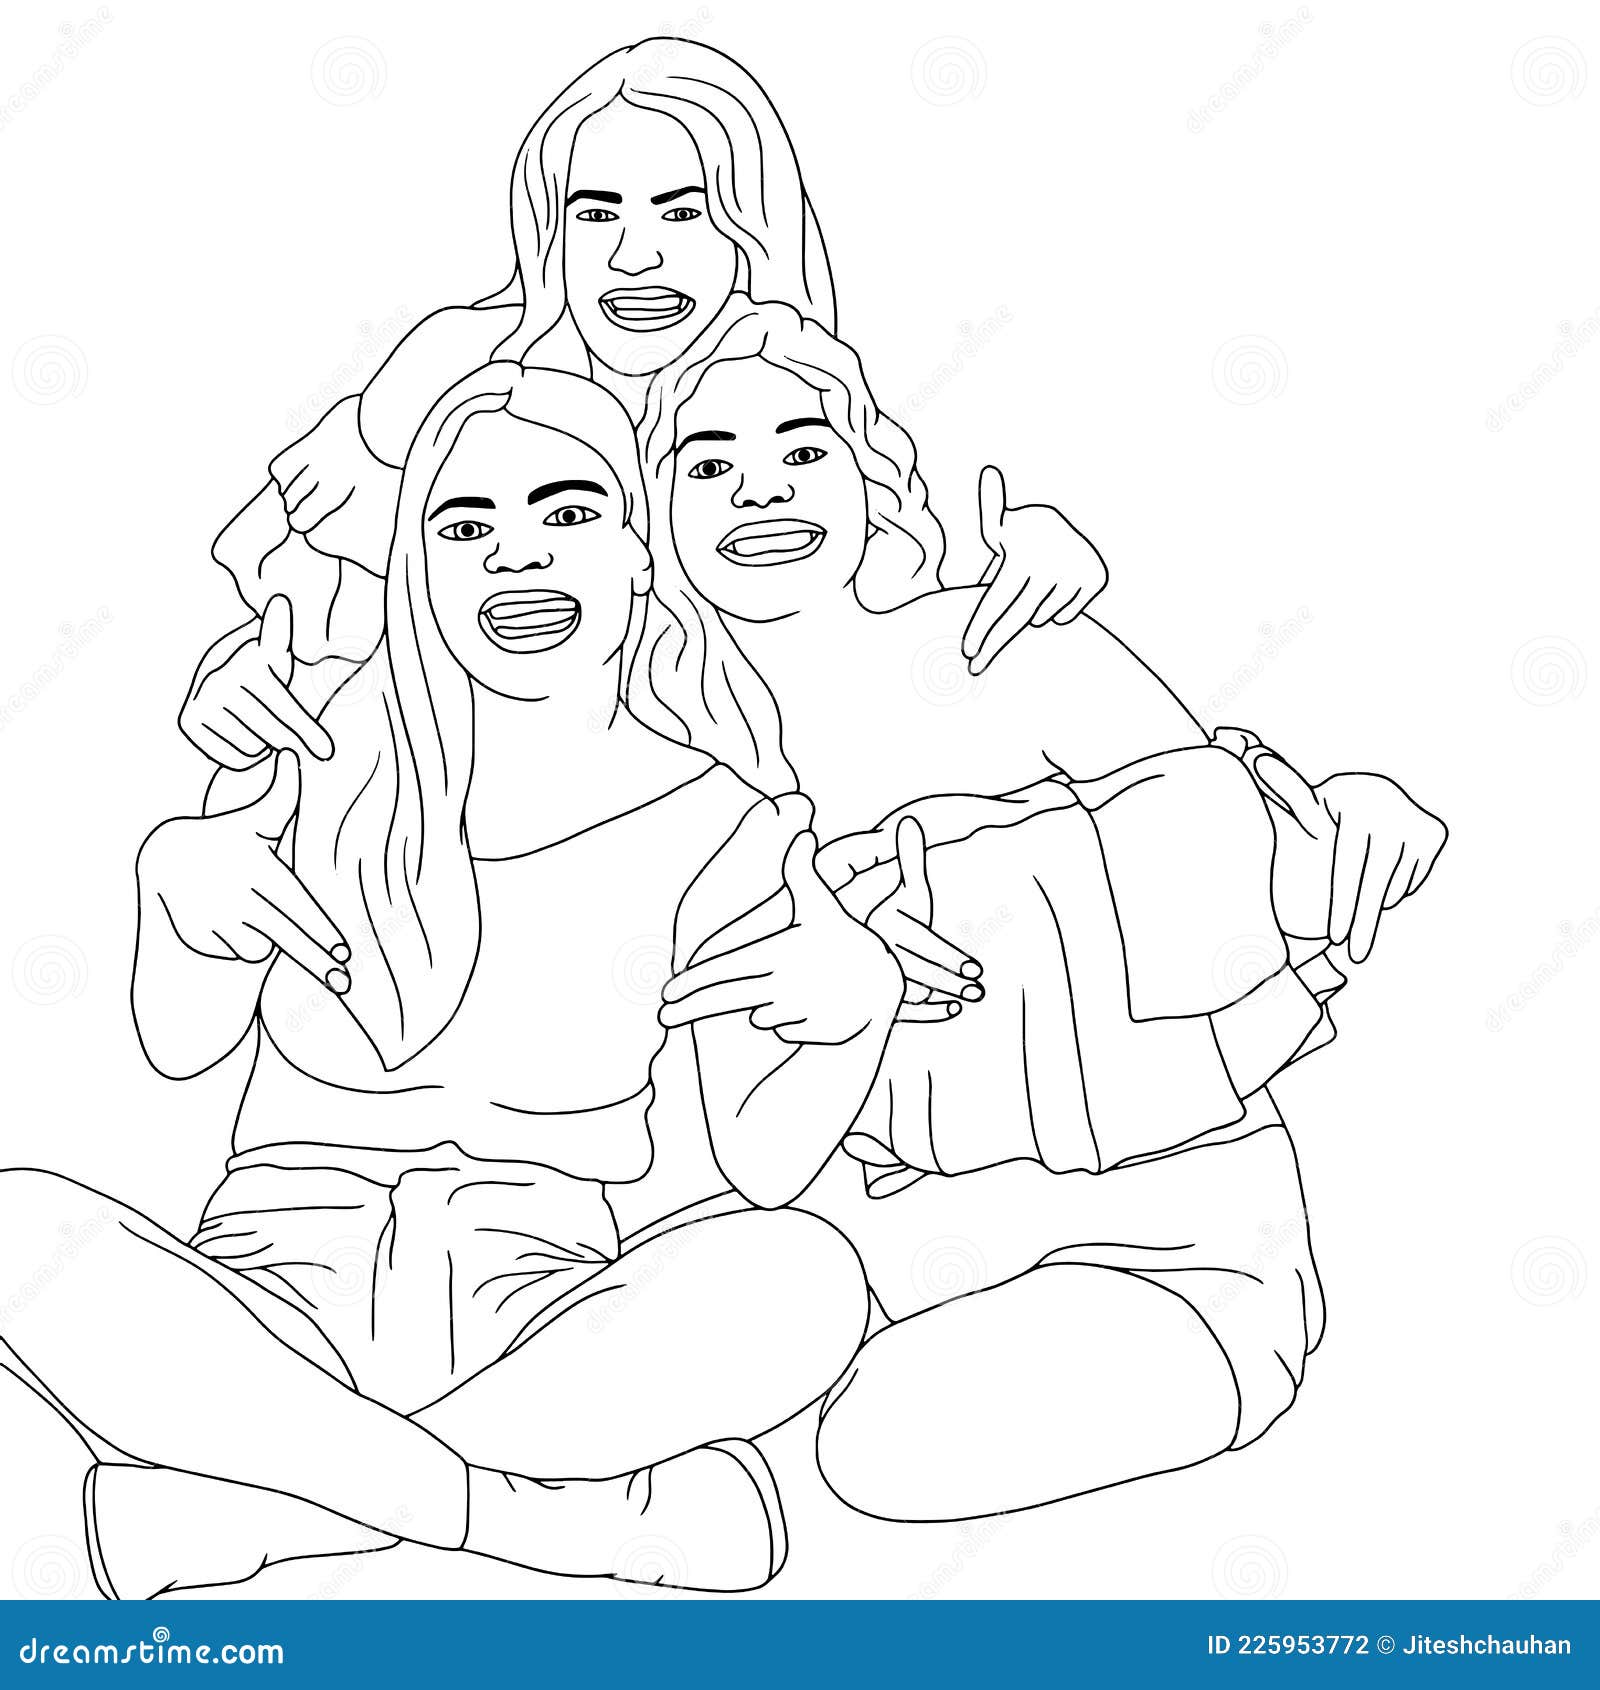 coloring pages group friends having fun dancing flat colorful illustration people friendship day hand drawn character 225953772